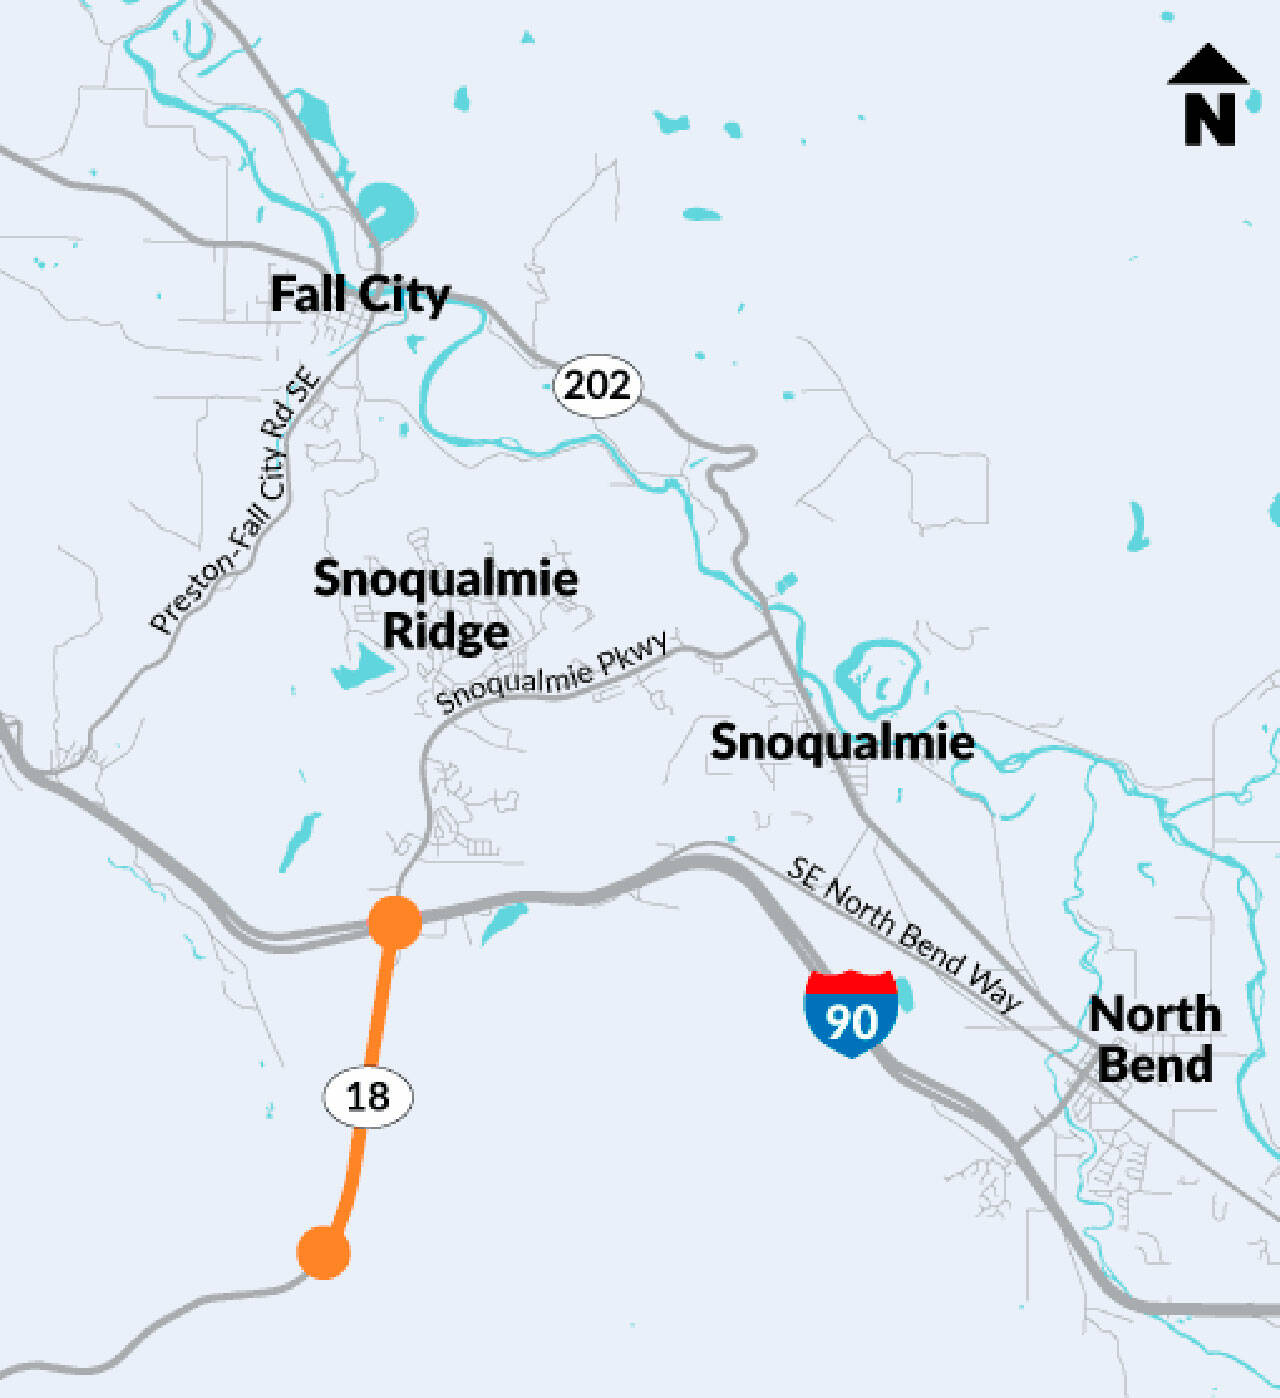 Lane closures are scheduled over the next two months for a portion of State Route 18 near Interstate 90. COURTESY GRAPHIC, Washington State Department of Transportation